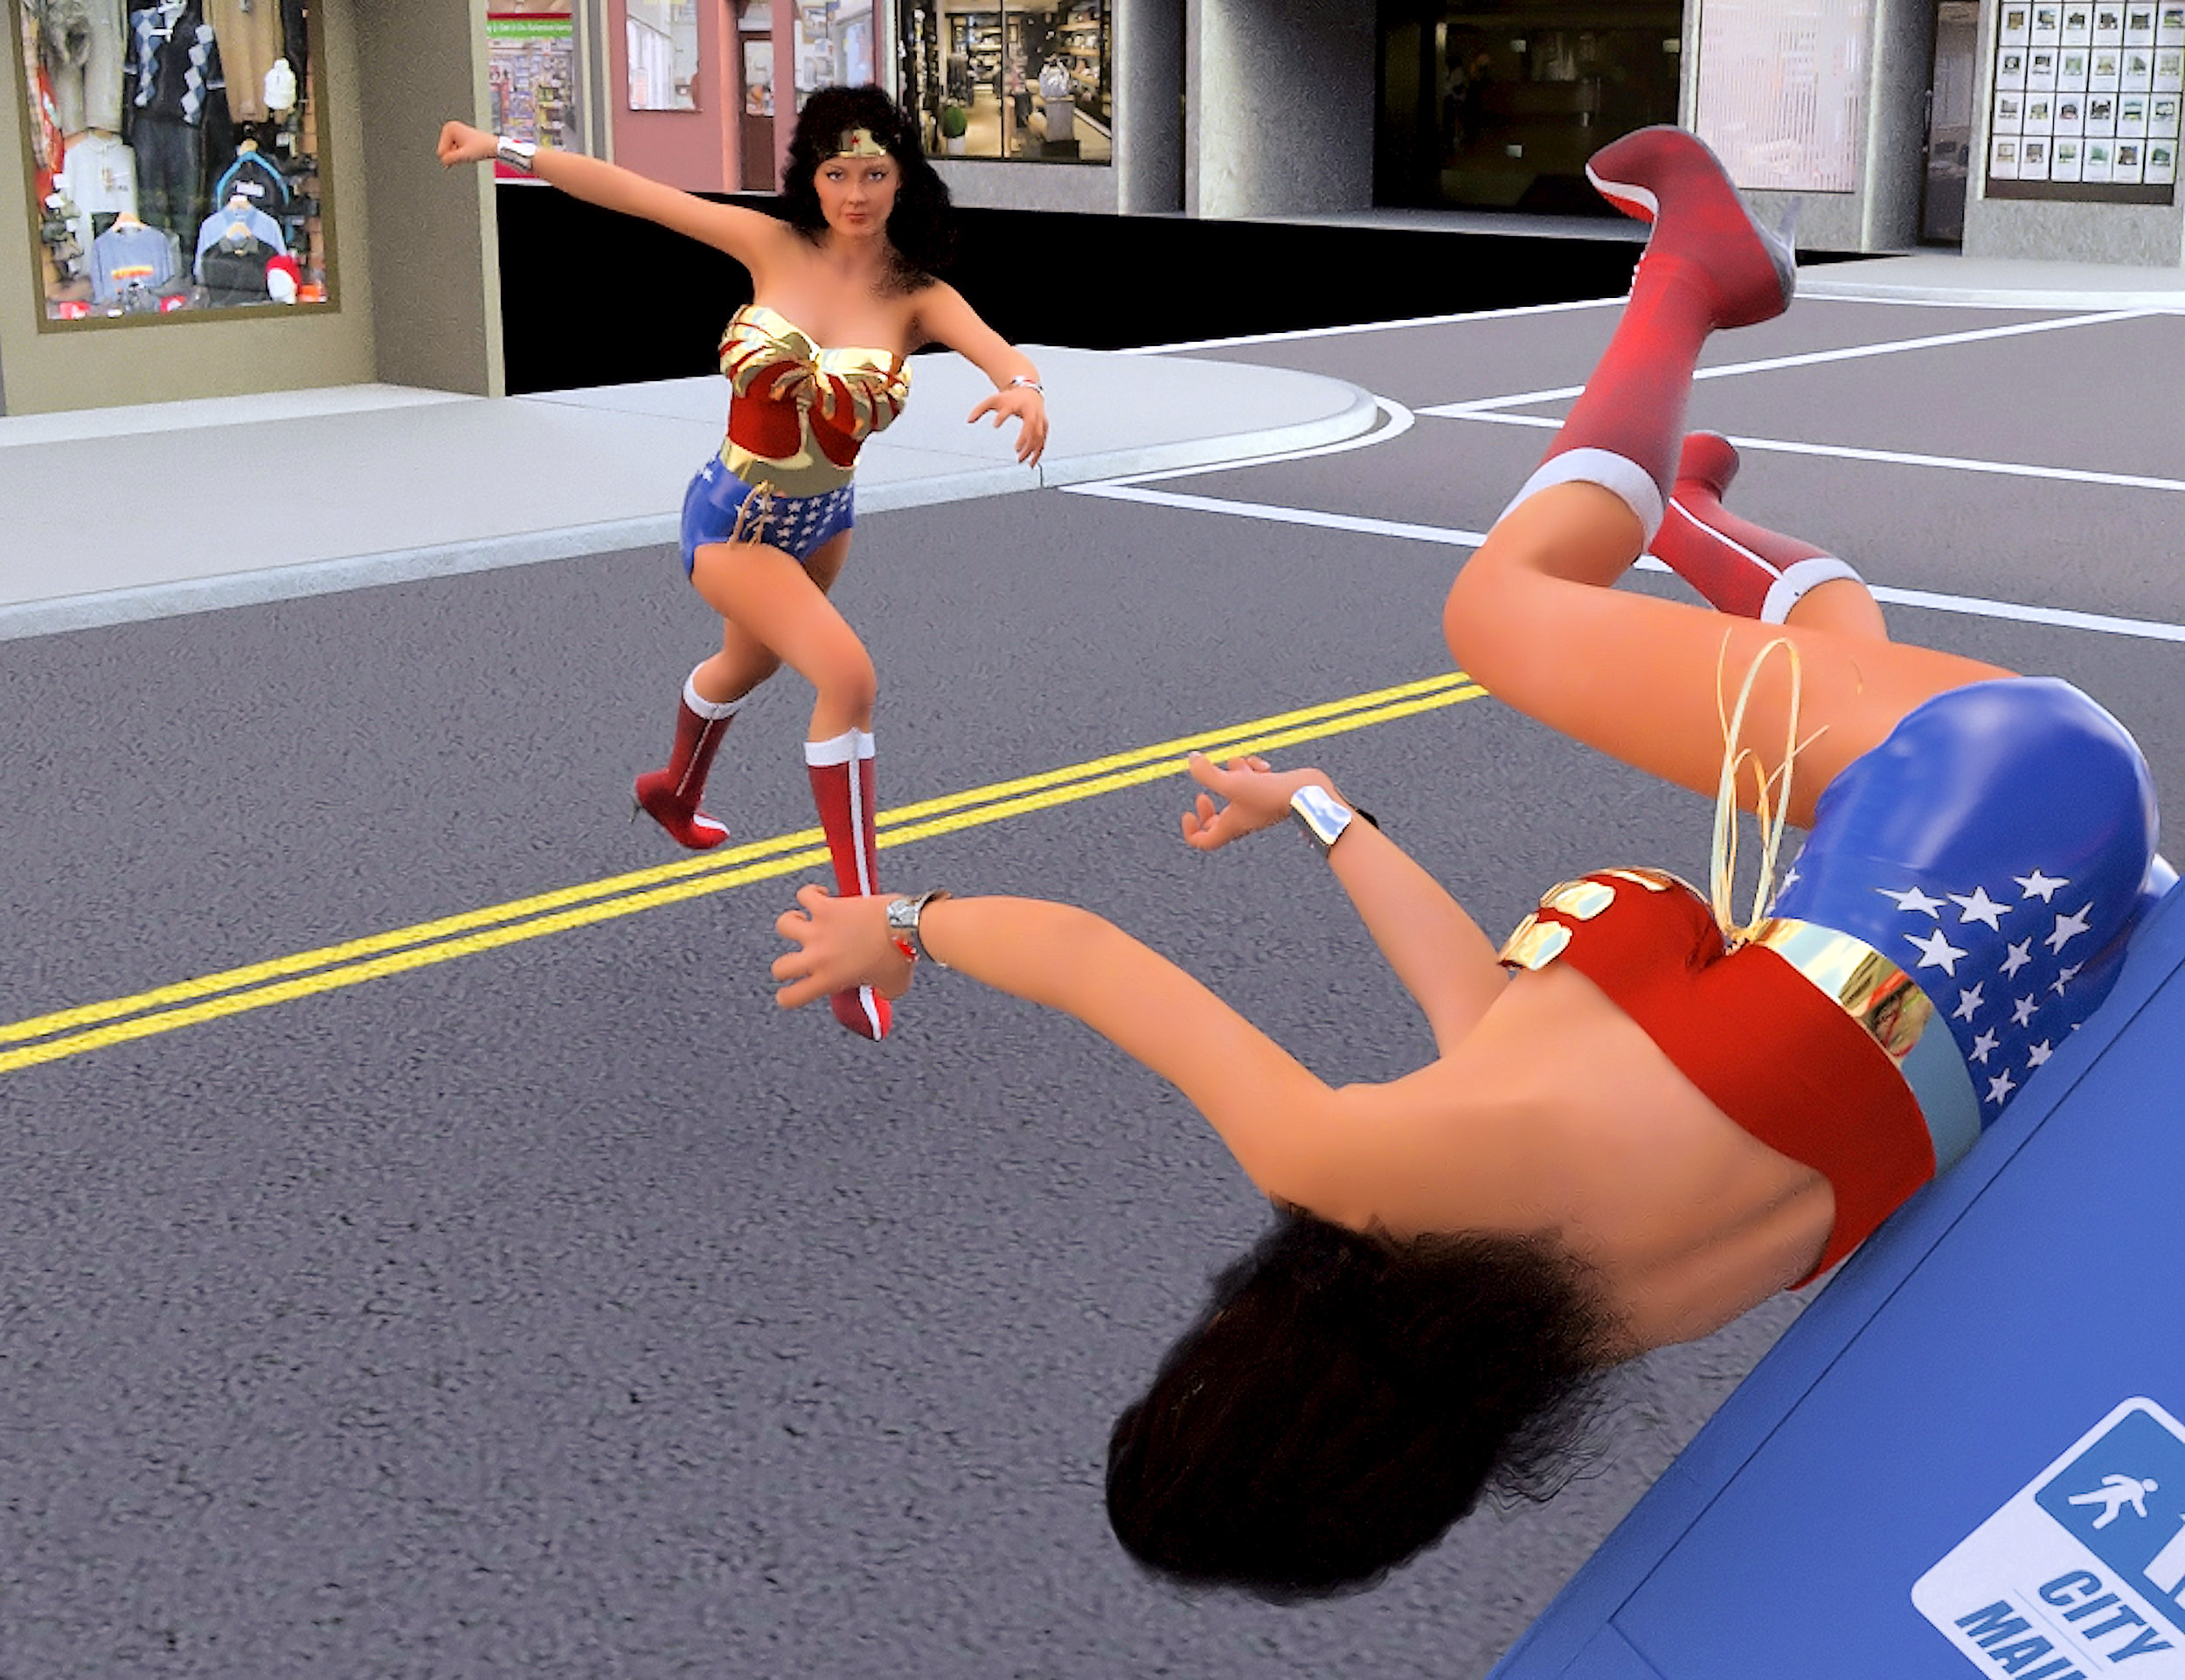 Wonder Woman's crotch grabbed by villain by GodessesOfEarth on DeviantArt